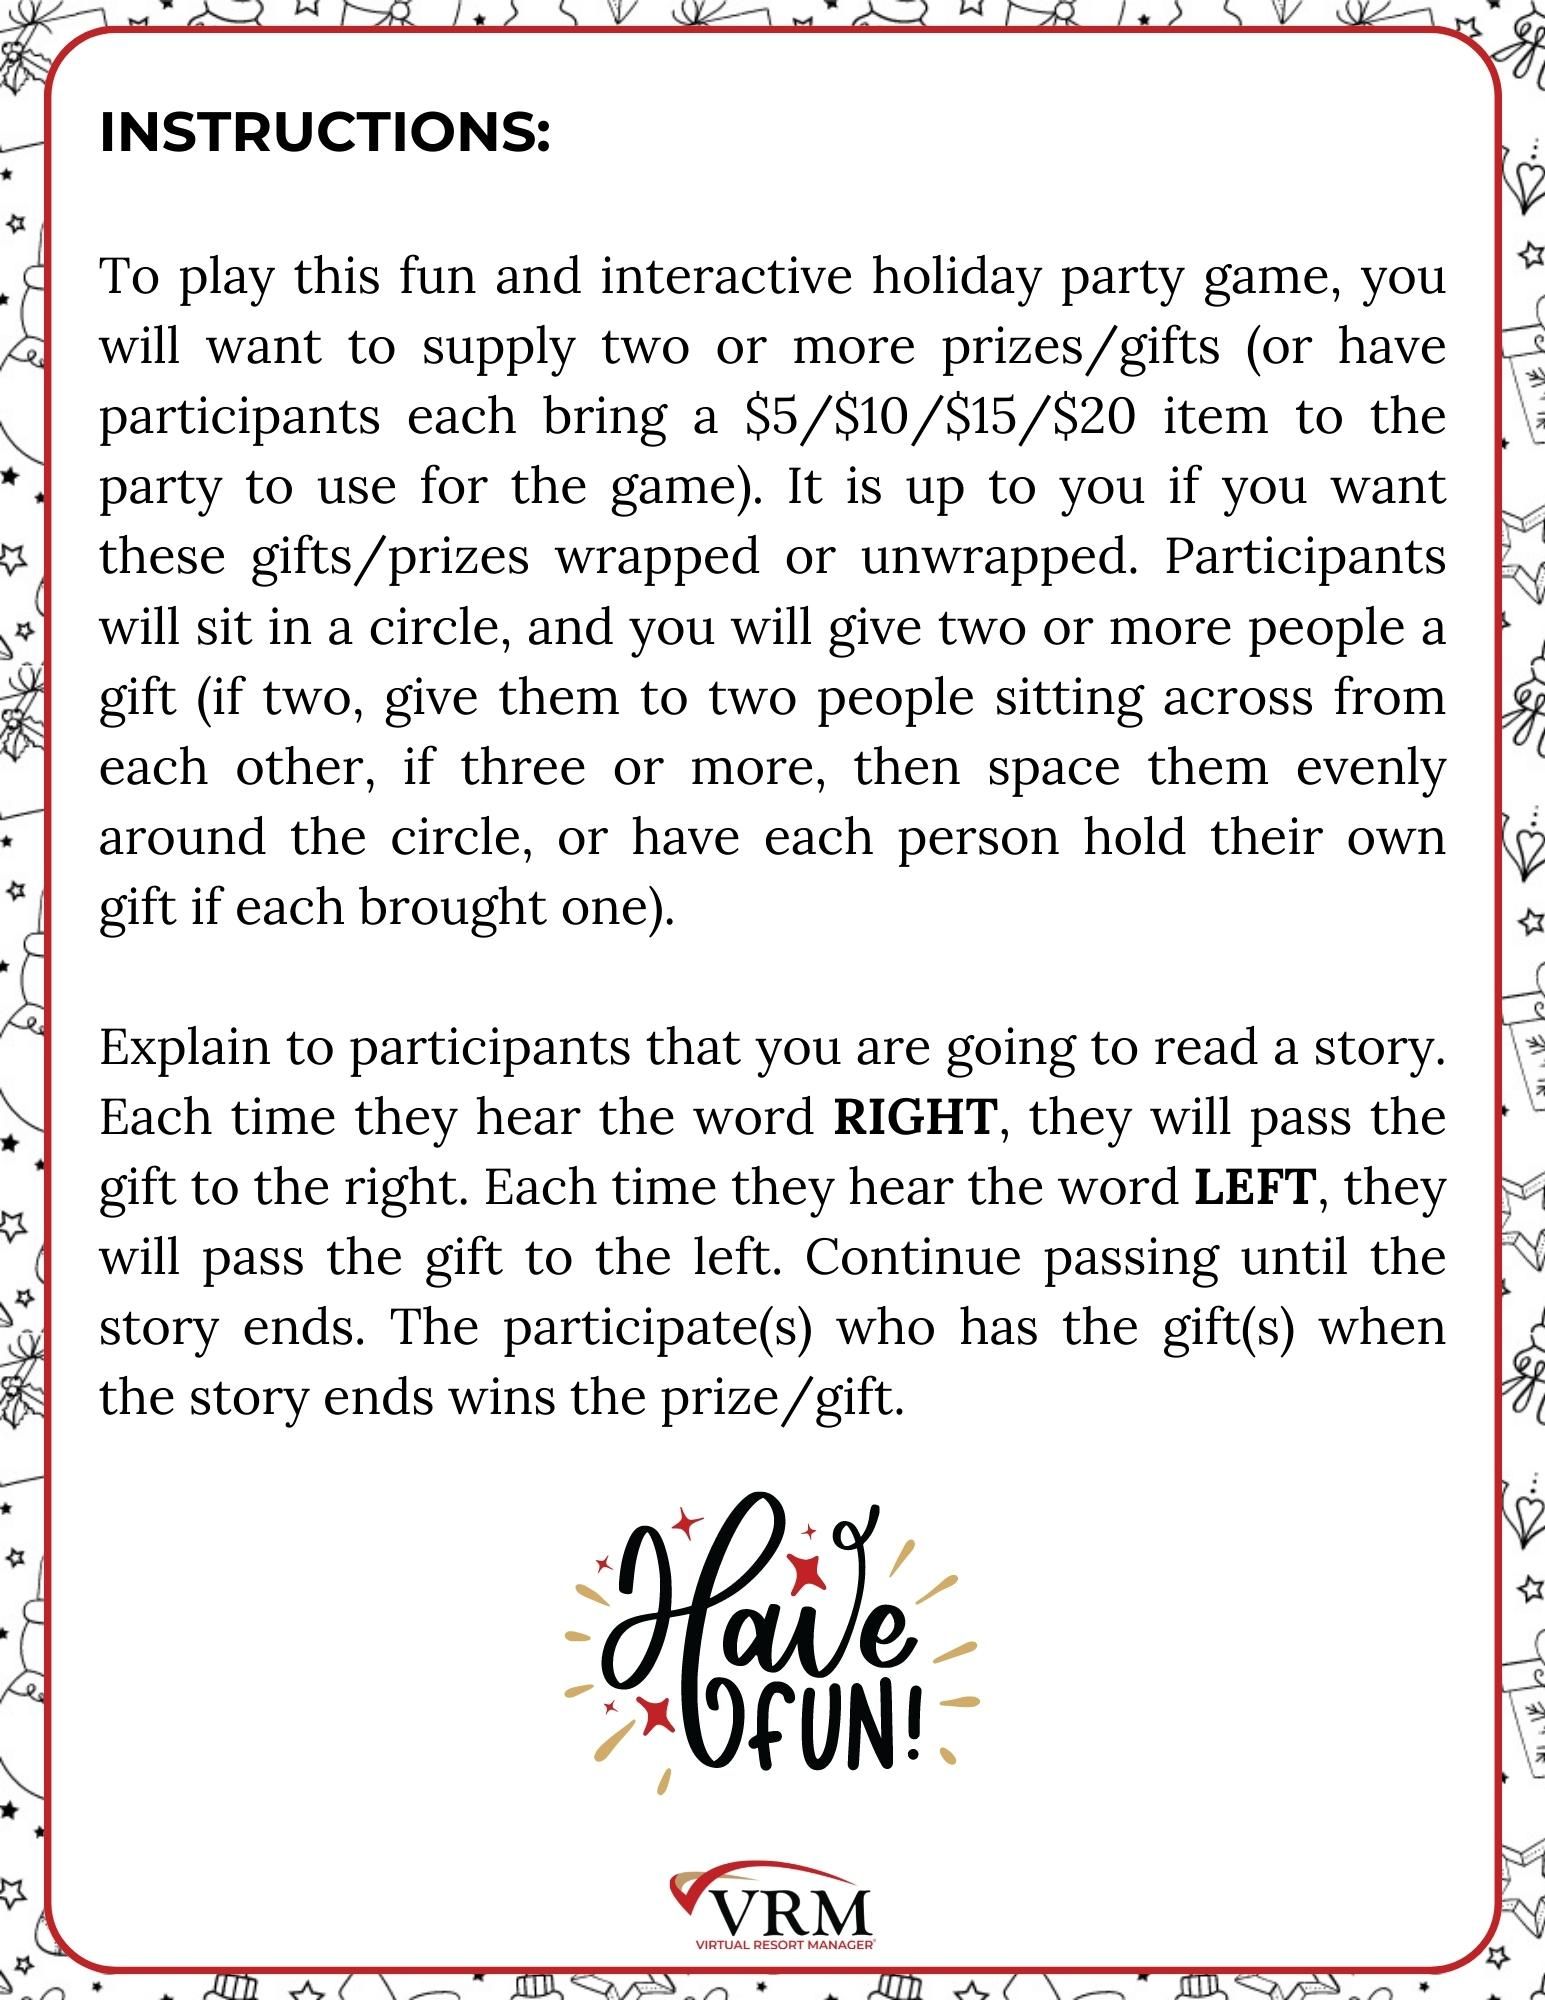 Free Printable Left Right Christmas Game, Vacation Rental Management Edition